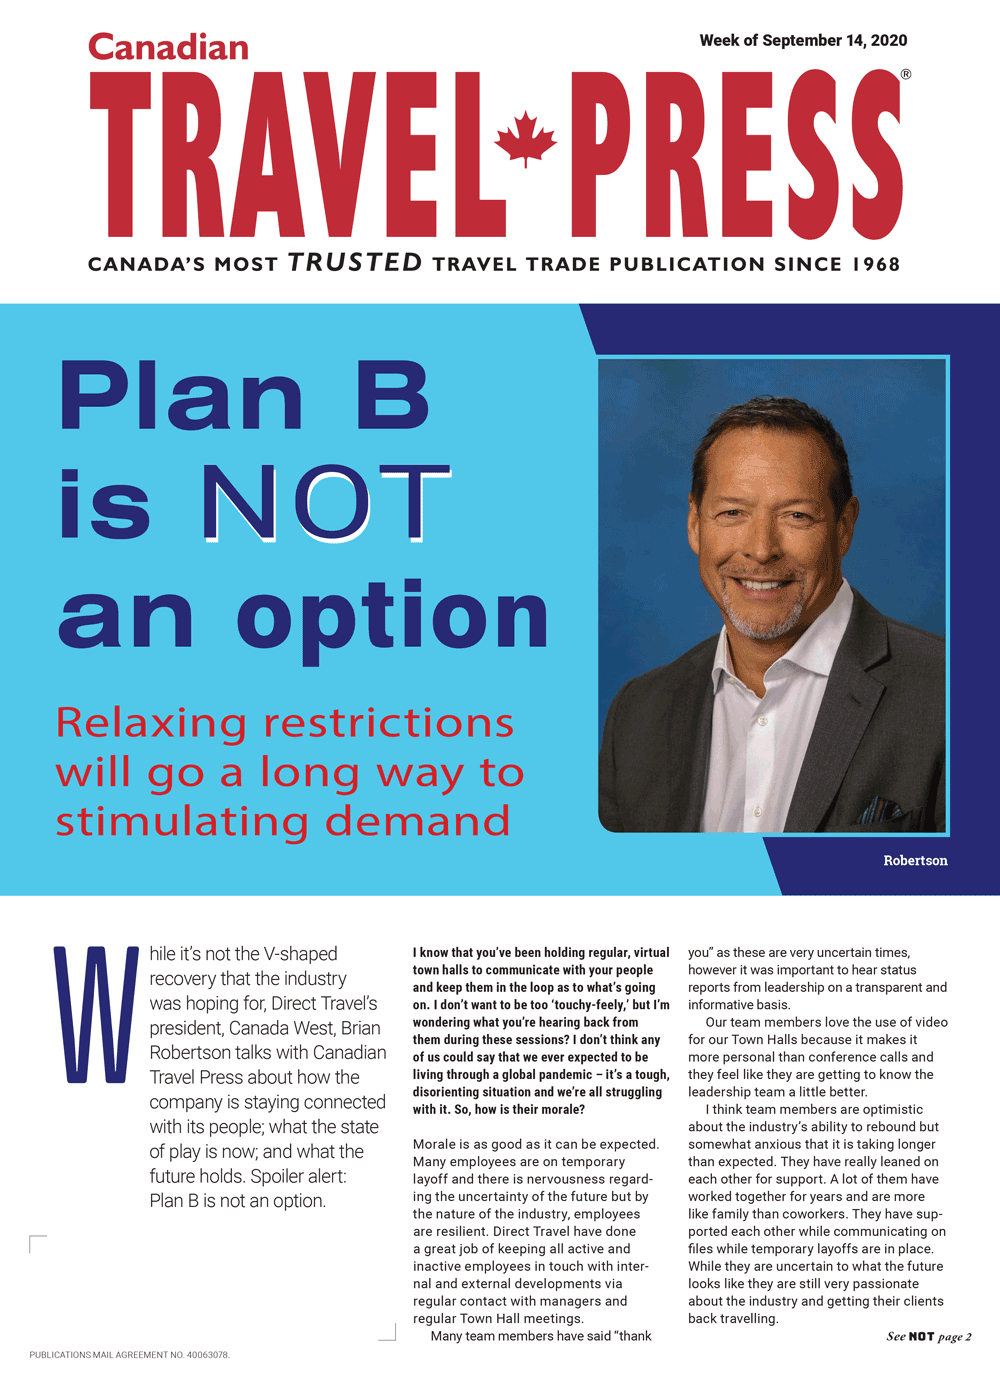 Take note: Plan B is not an option